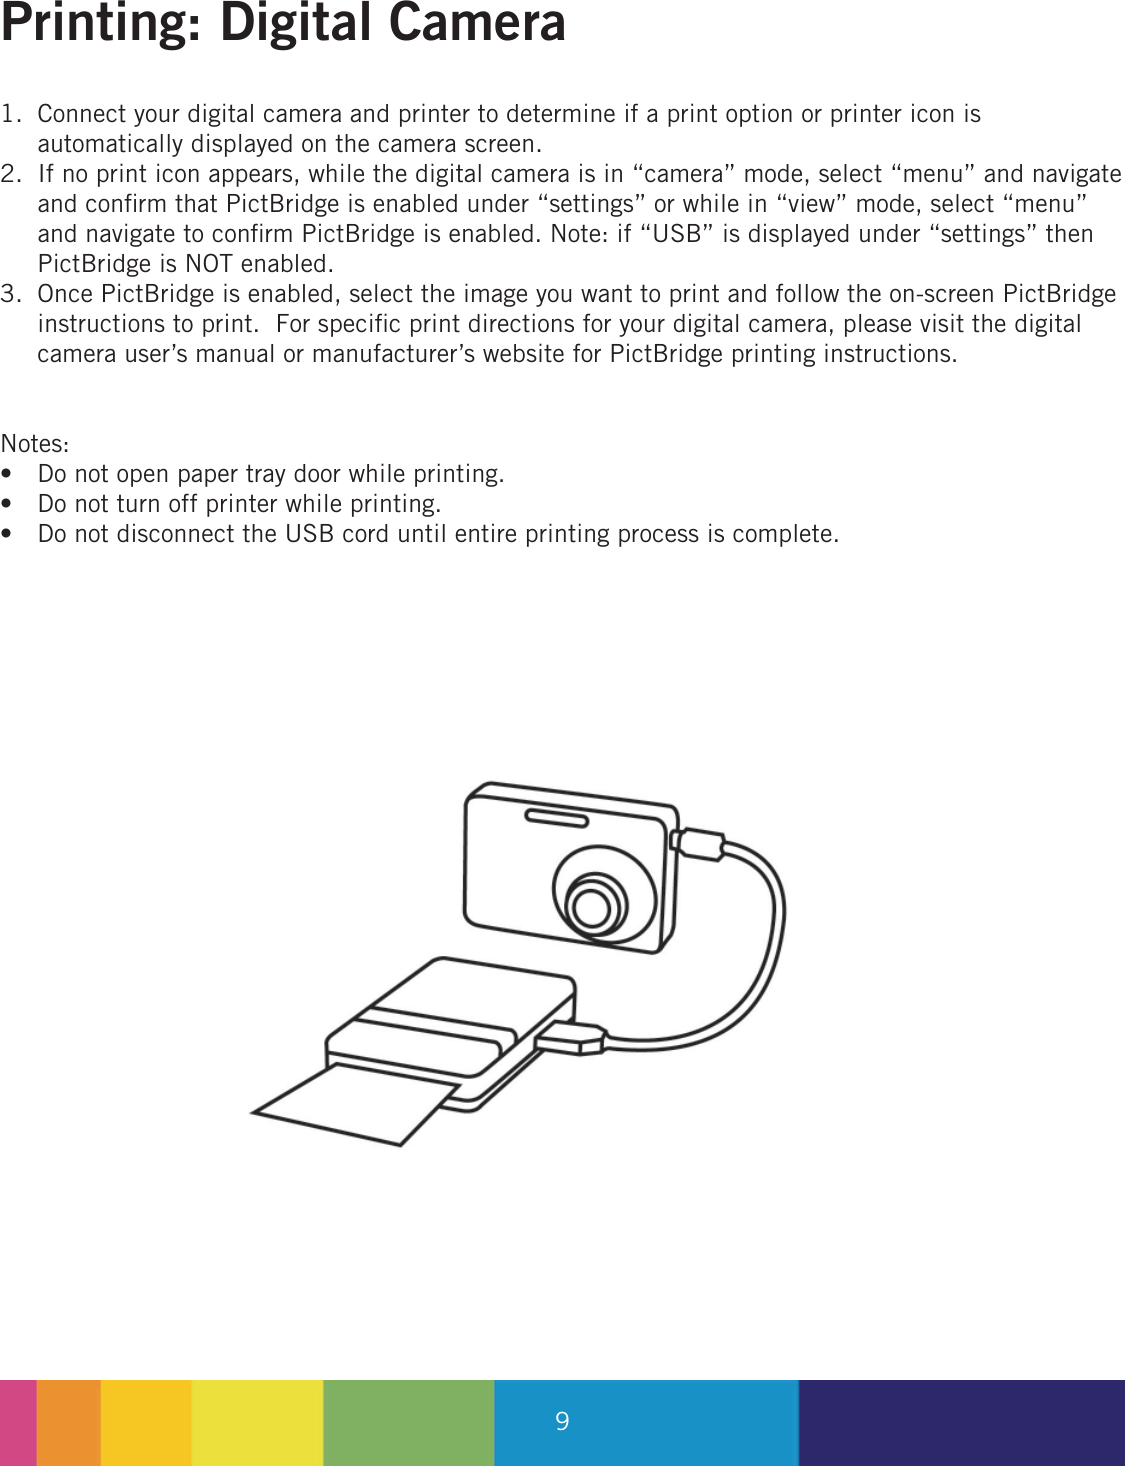 9Connect your digital camera and printer to determine if a print option or printer icon is automatically displayed on the camera screen.If no print icon appears, while the digital camera is in “camera” mode, select “menu” and navigate and conﬁ rm that PictBridge is enabled under “settings” or while in “view” mode, select “menu” and navigate to conﬁ rm PictBridge is enabled. Note: if “USB” is displayed under “settings” then PictBridge is NOT enabled.Once PictBridge is enabled, select the image you want to print and follow the on-screen PictBridge instructions to print.  For speciﬁ c print directions for your digital camera, please visit the digital camera user’s manual or manufacturer’s website for PictBridge printing instructions.Notes:Do not open paper tray door while printing.Do not turn off printer while printing.Do not disconnect the USB cord until entire printing process is complete.1.2.3.•••Printing: Digital Camera